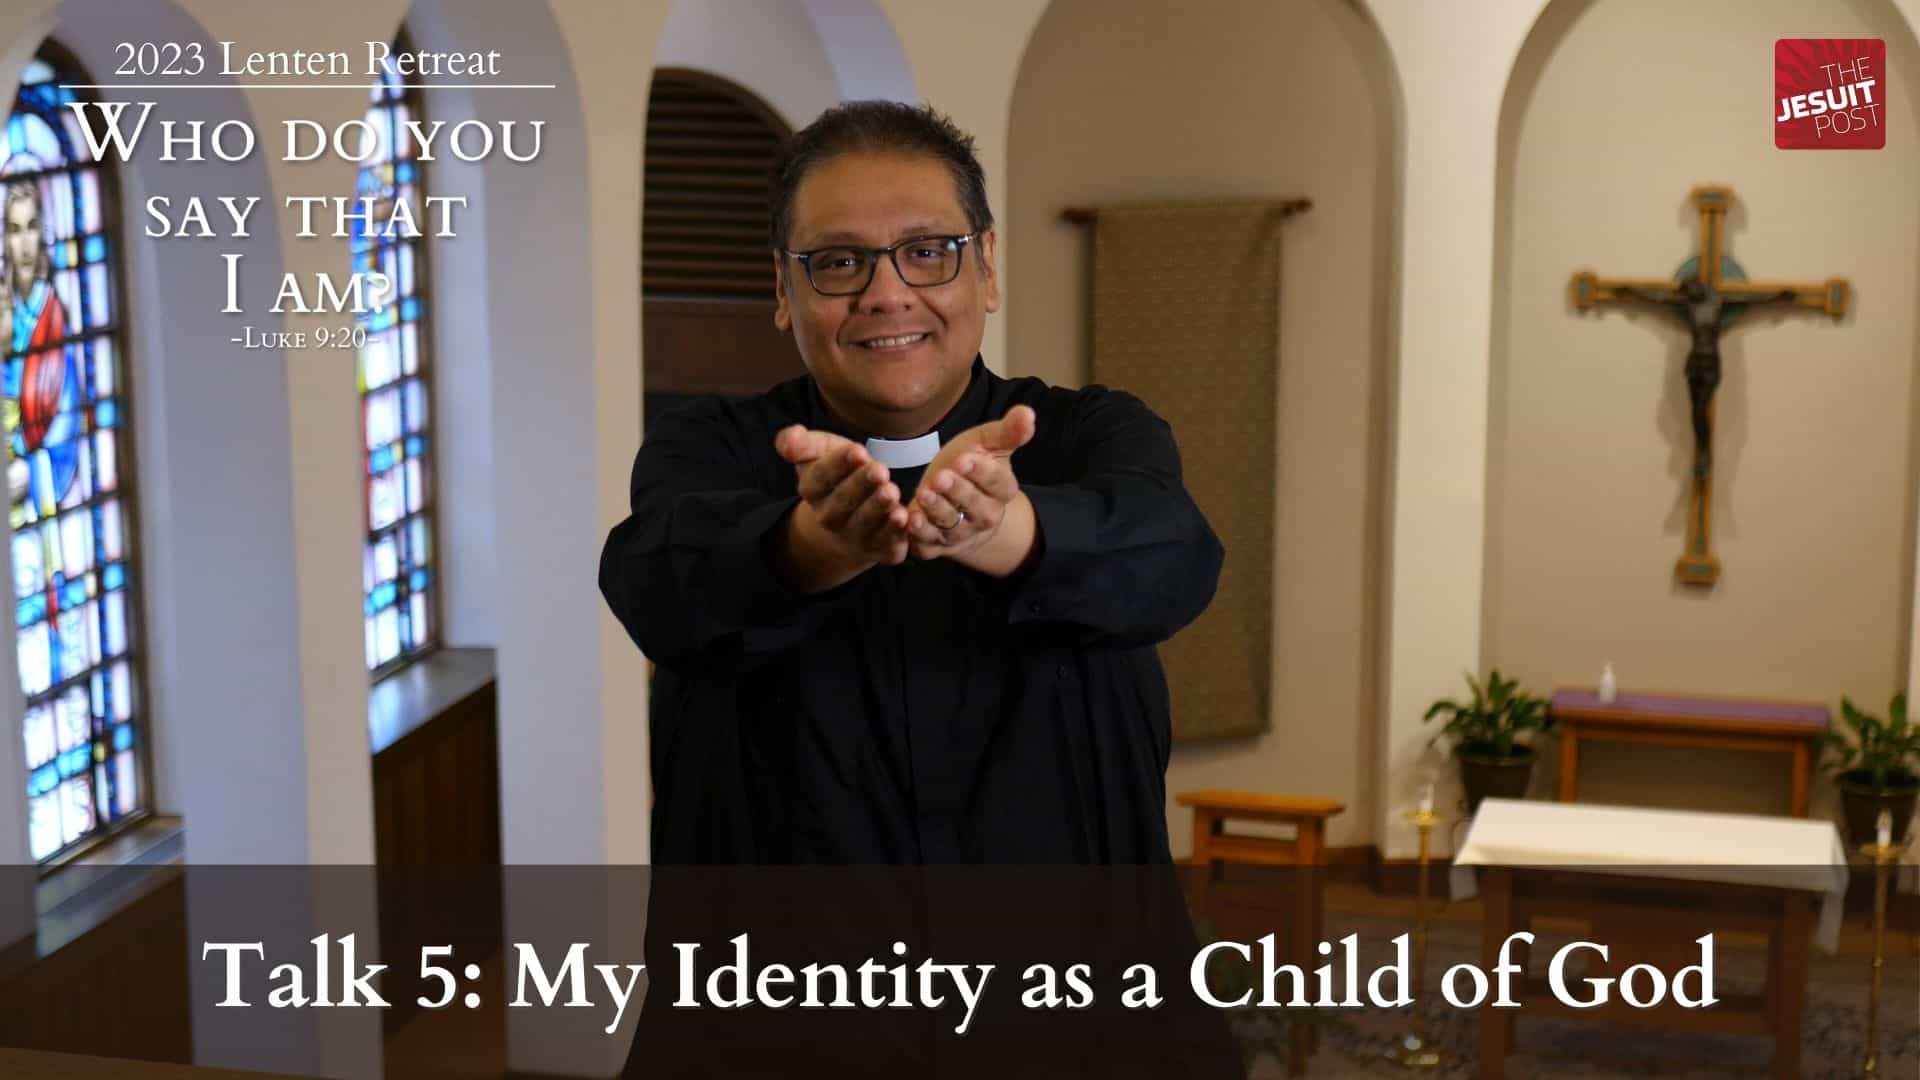 Talk 5: My Identity as a Child of God | 2023 Lenten Retreat: Who do you say that I am?